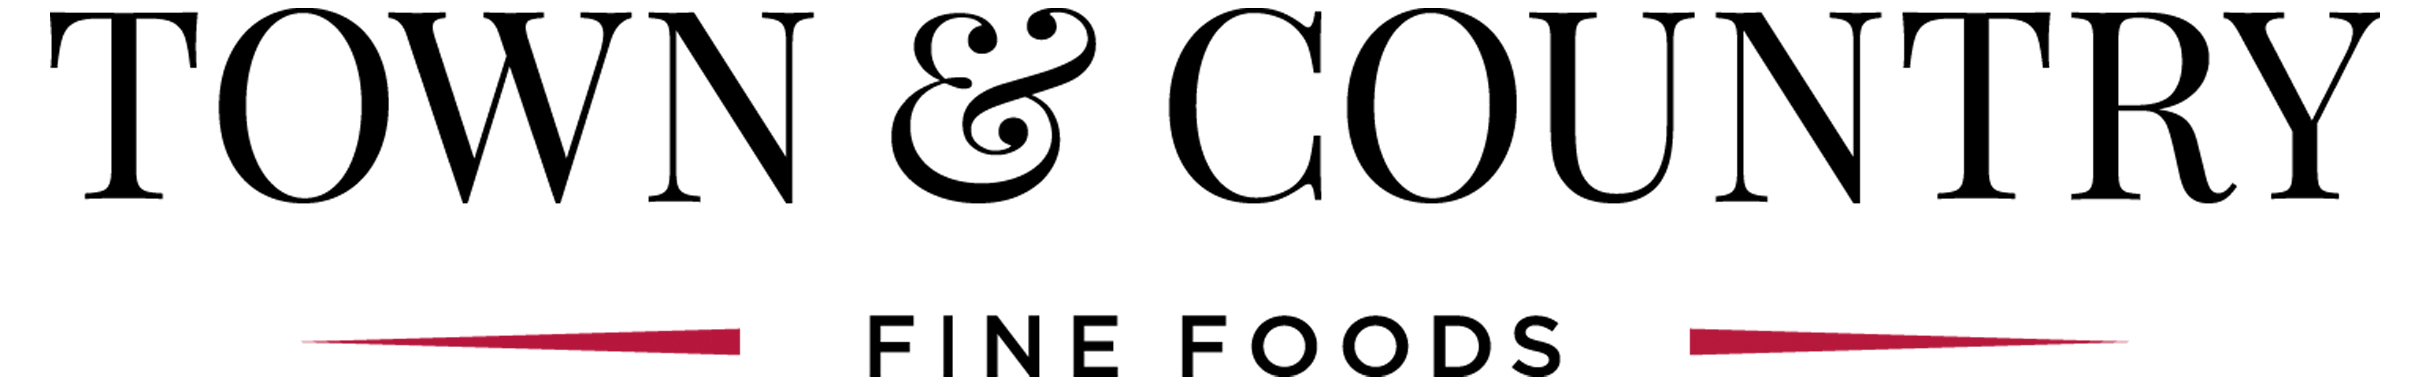 logo for Town & Country Fine Foods Ltd.